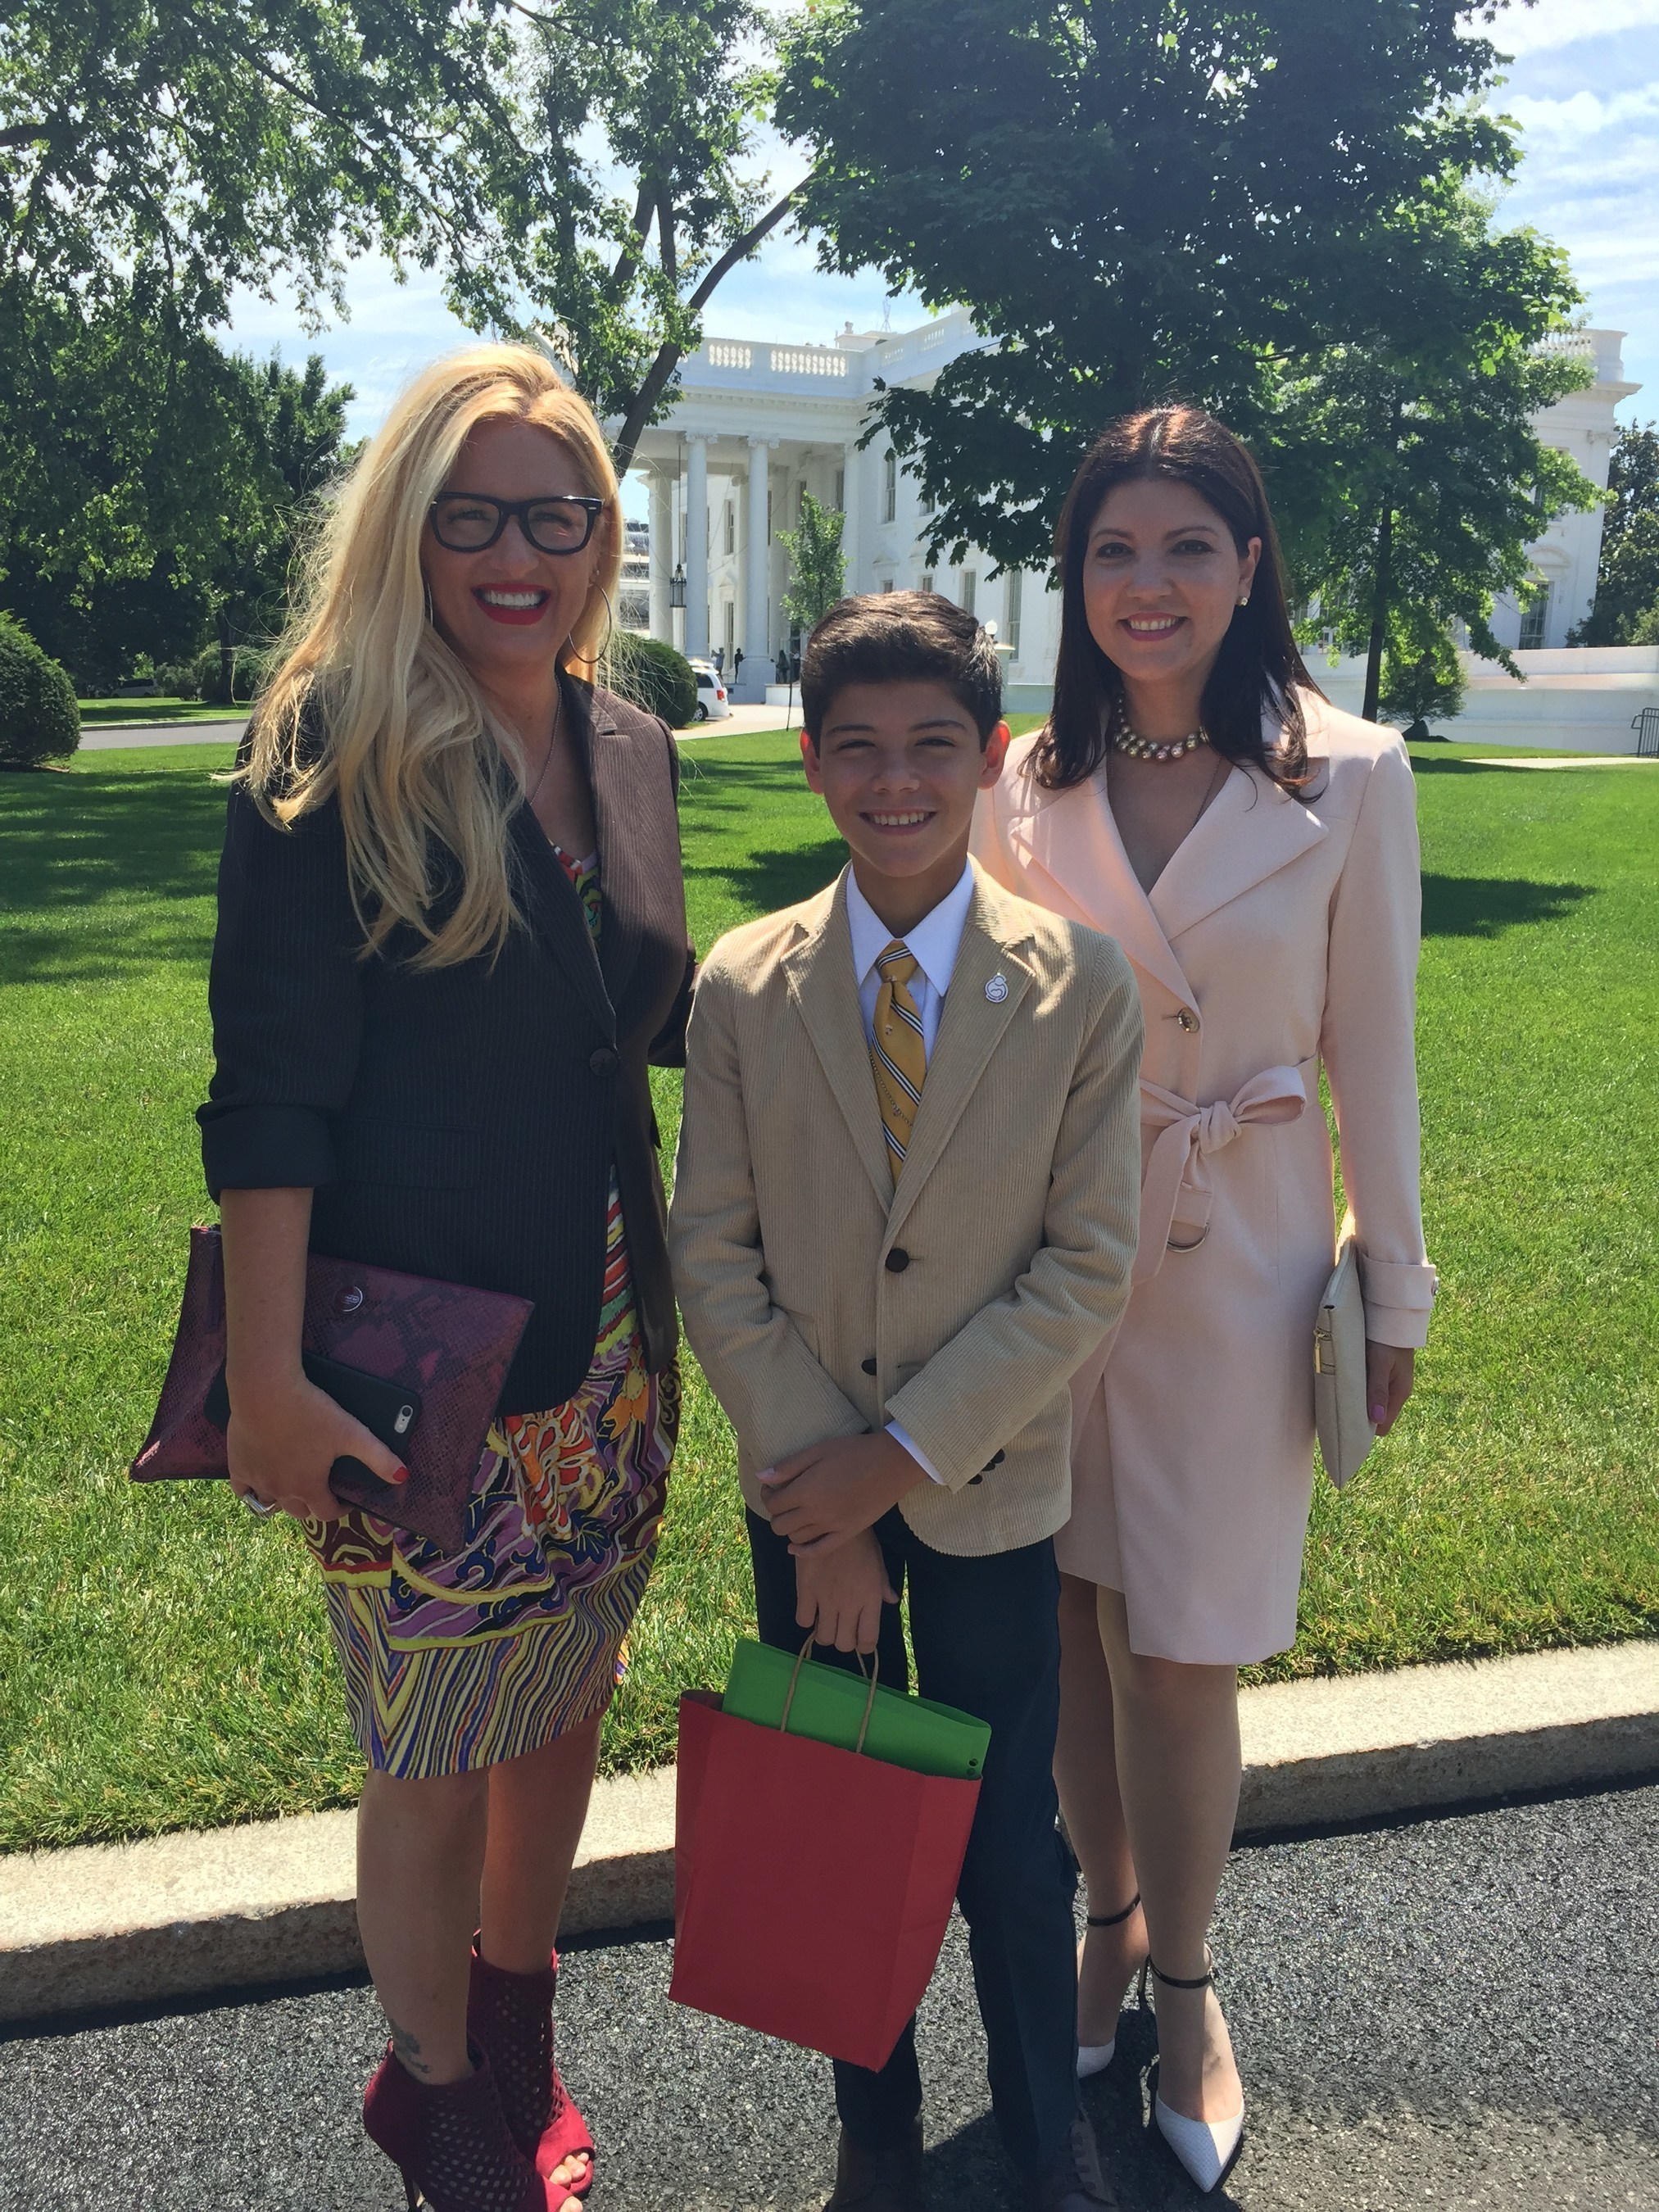 Kelly Cook, left, Kmart's chief marketing officer and the mother of triplets born prematurely, accompanied the March of Dimes 2016 National Ambassador and Puerto Rican native Ismael Torres-Castrodad, and his mother, Ismari Castrodad, right, to visit President Barack Obama at the White House on June 30, 2016. Ms. Cook and Kmart, the top corporate sponsor for the March of Dimes for 33 years, pledged an additional $250,000 to help support the March of Dimes fight against Zika and their #ZAPzika campaign.